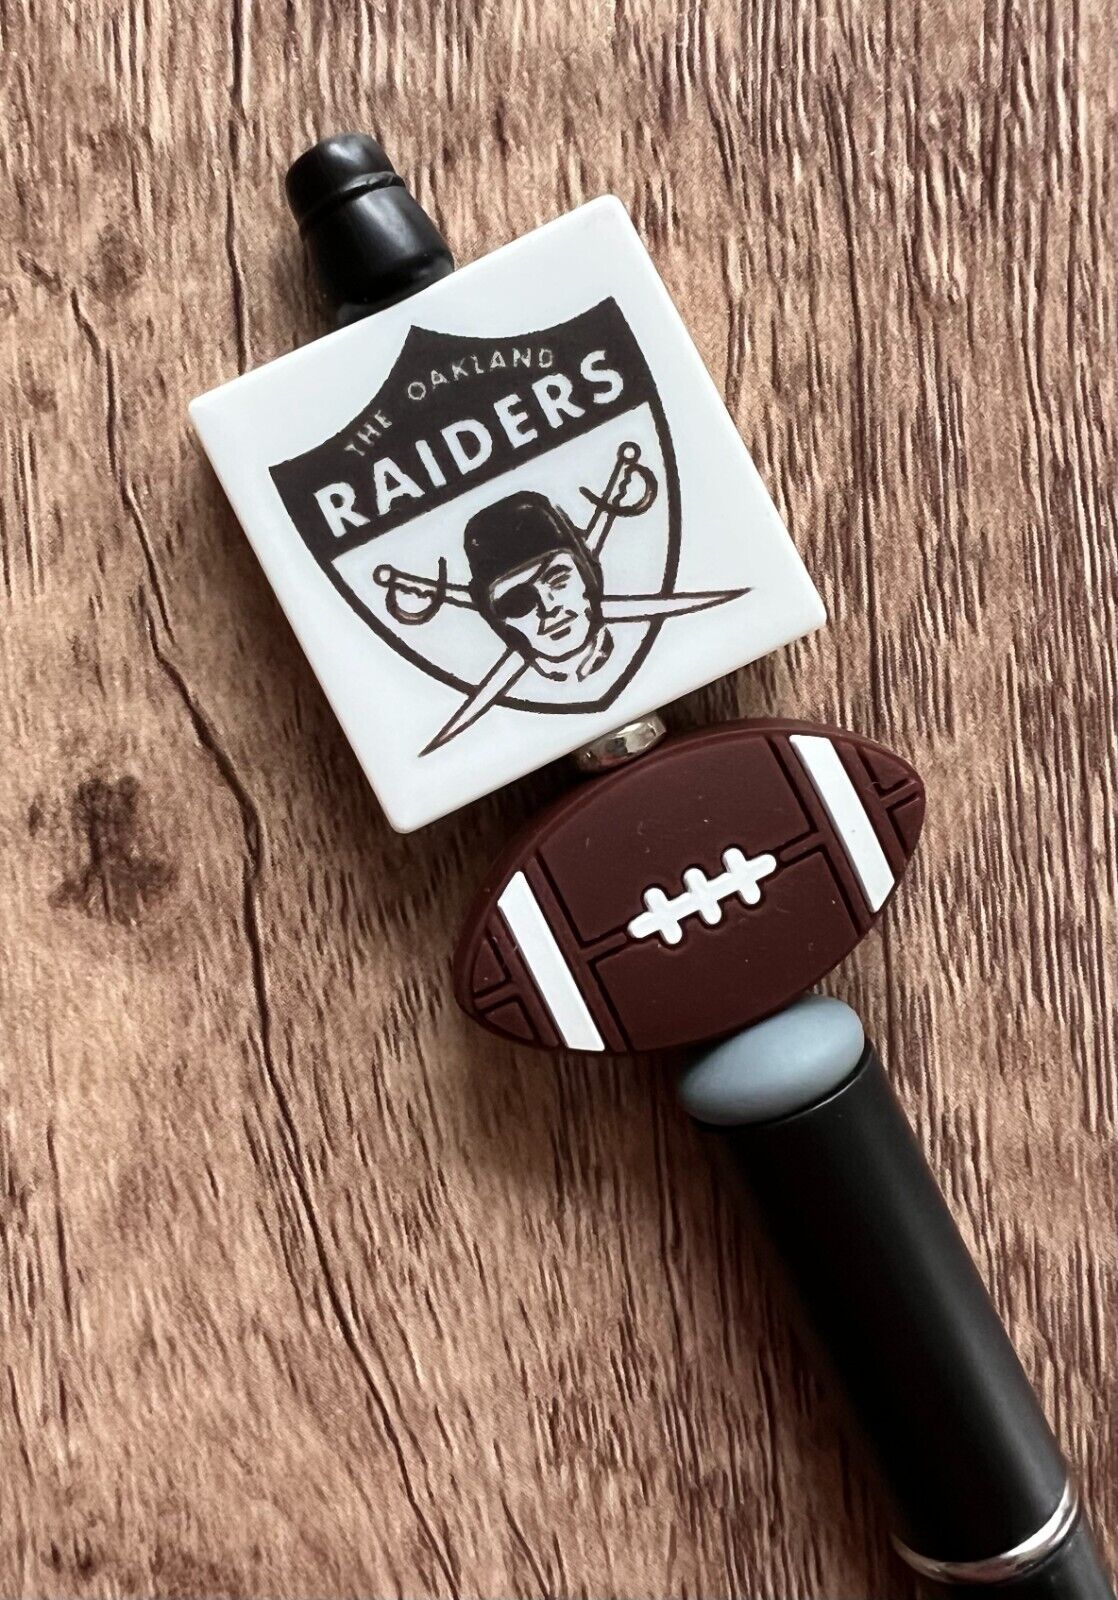 Football pens NFL throwback logos. Raiders & Oilers. Gift.basket filler.collect